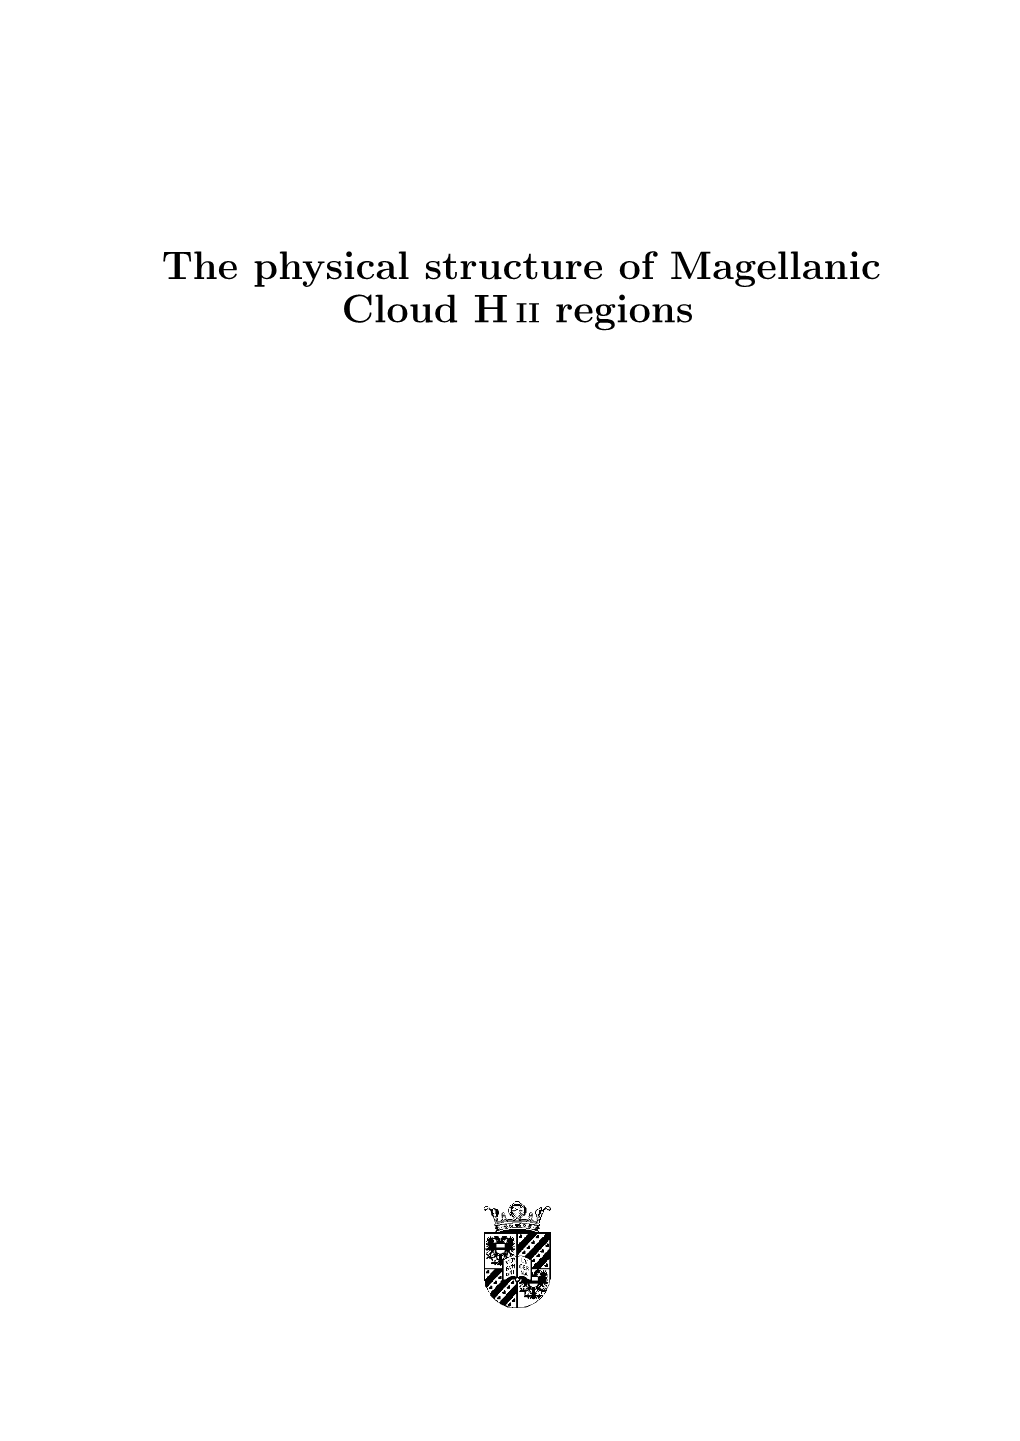 The Physical Structure of Magellanic Cloud H II Regions